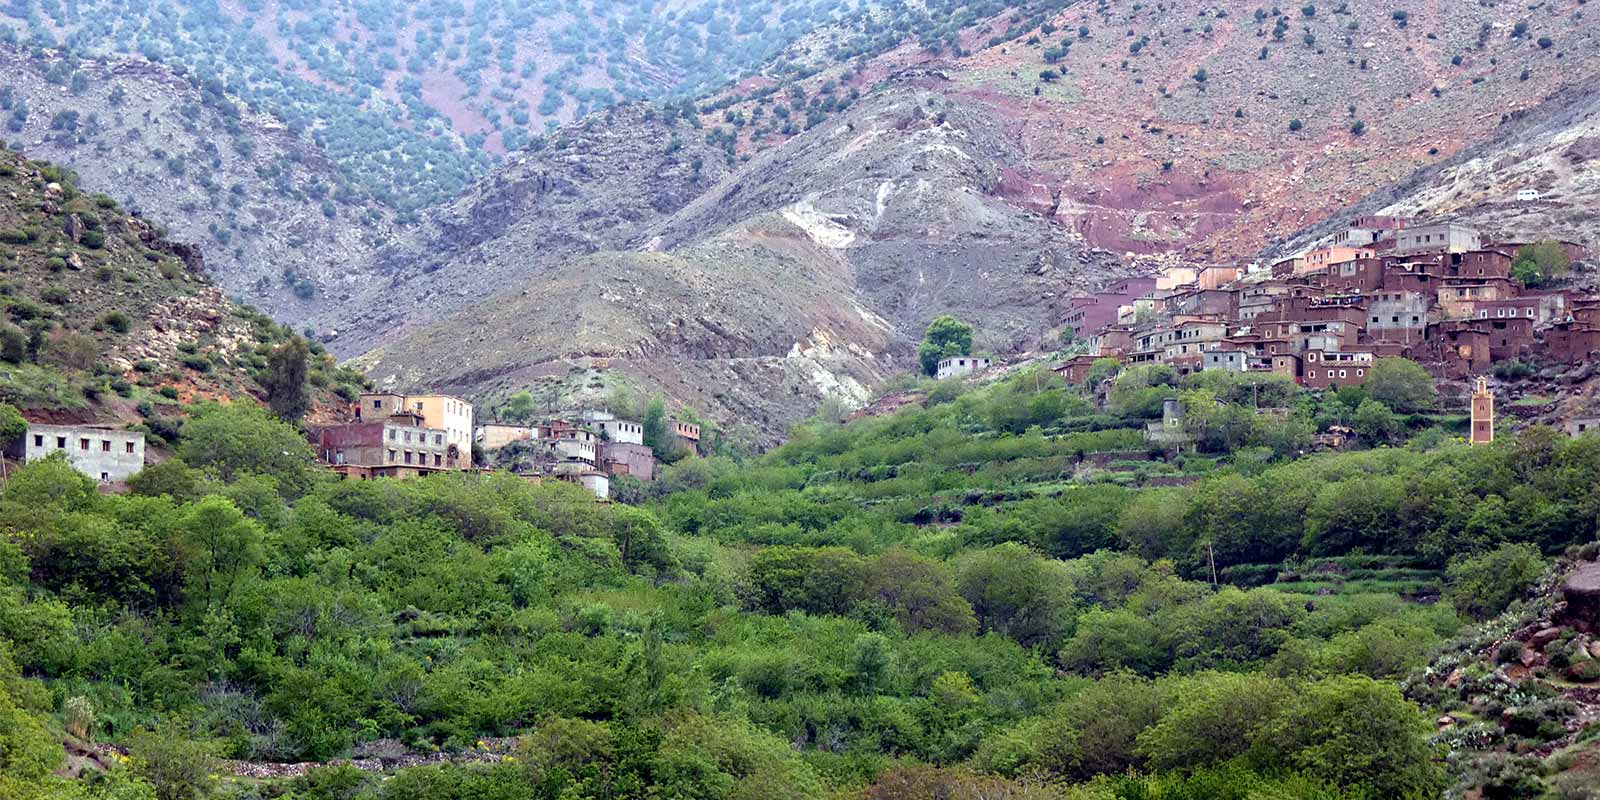 Village in the Atlas mountains of Morocco